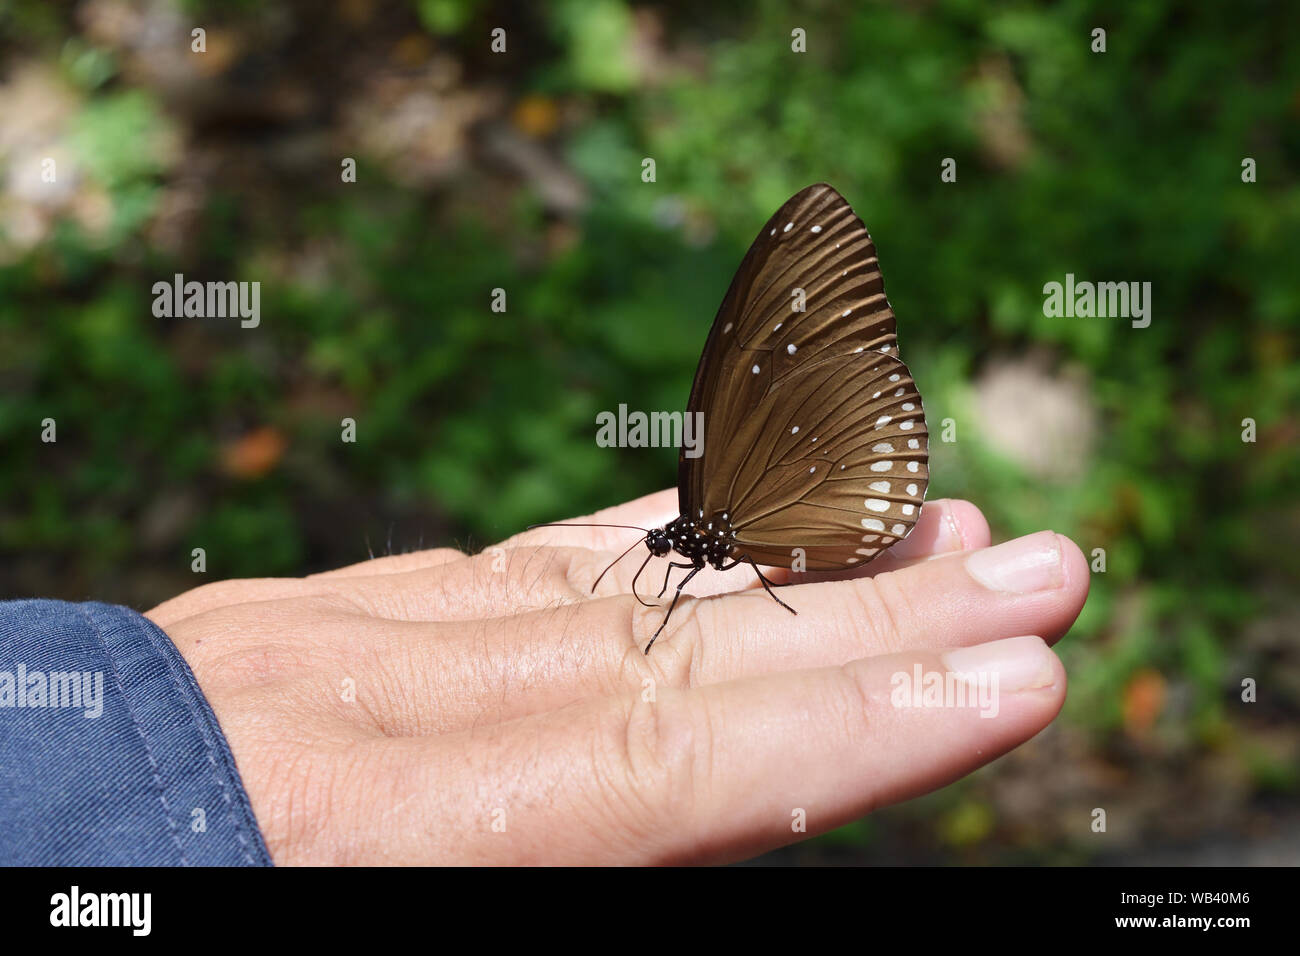 The Long-branded Blue Crow , Many white spots on dark brown wings , Butterfly climbing on human finger Stock Photo